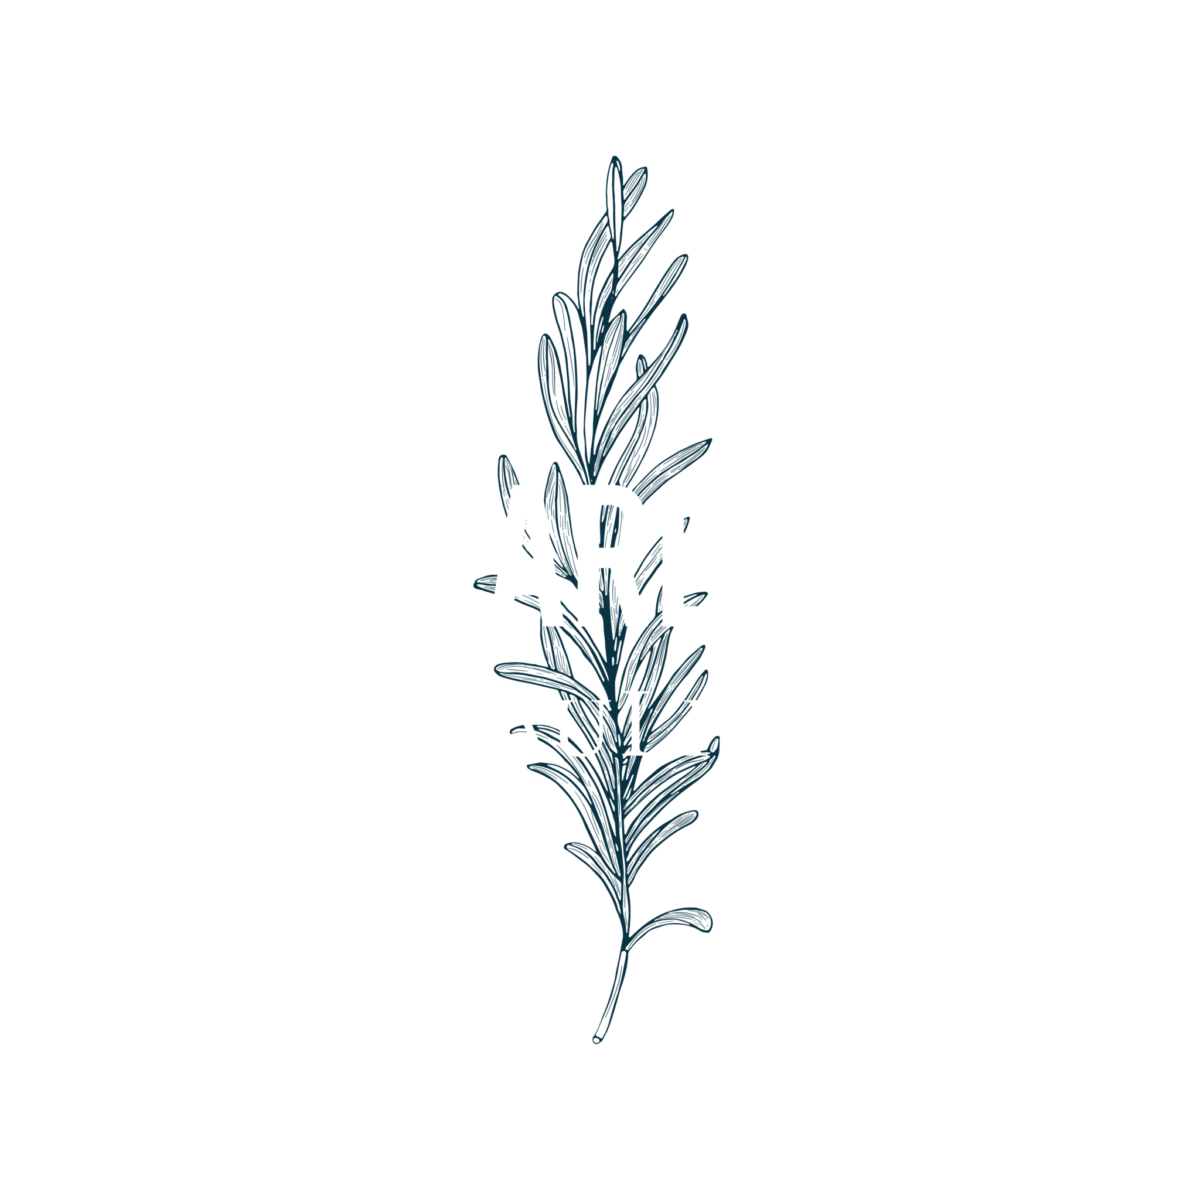 TheArbour_Logo_Rosemary_100%Slate&White_AW